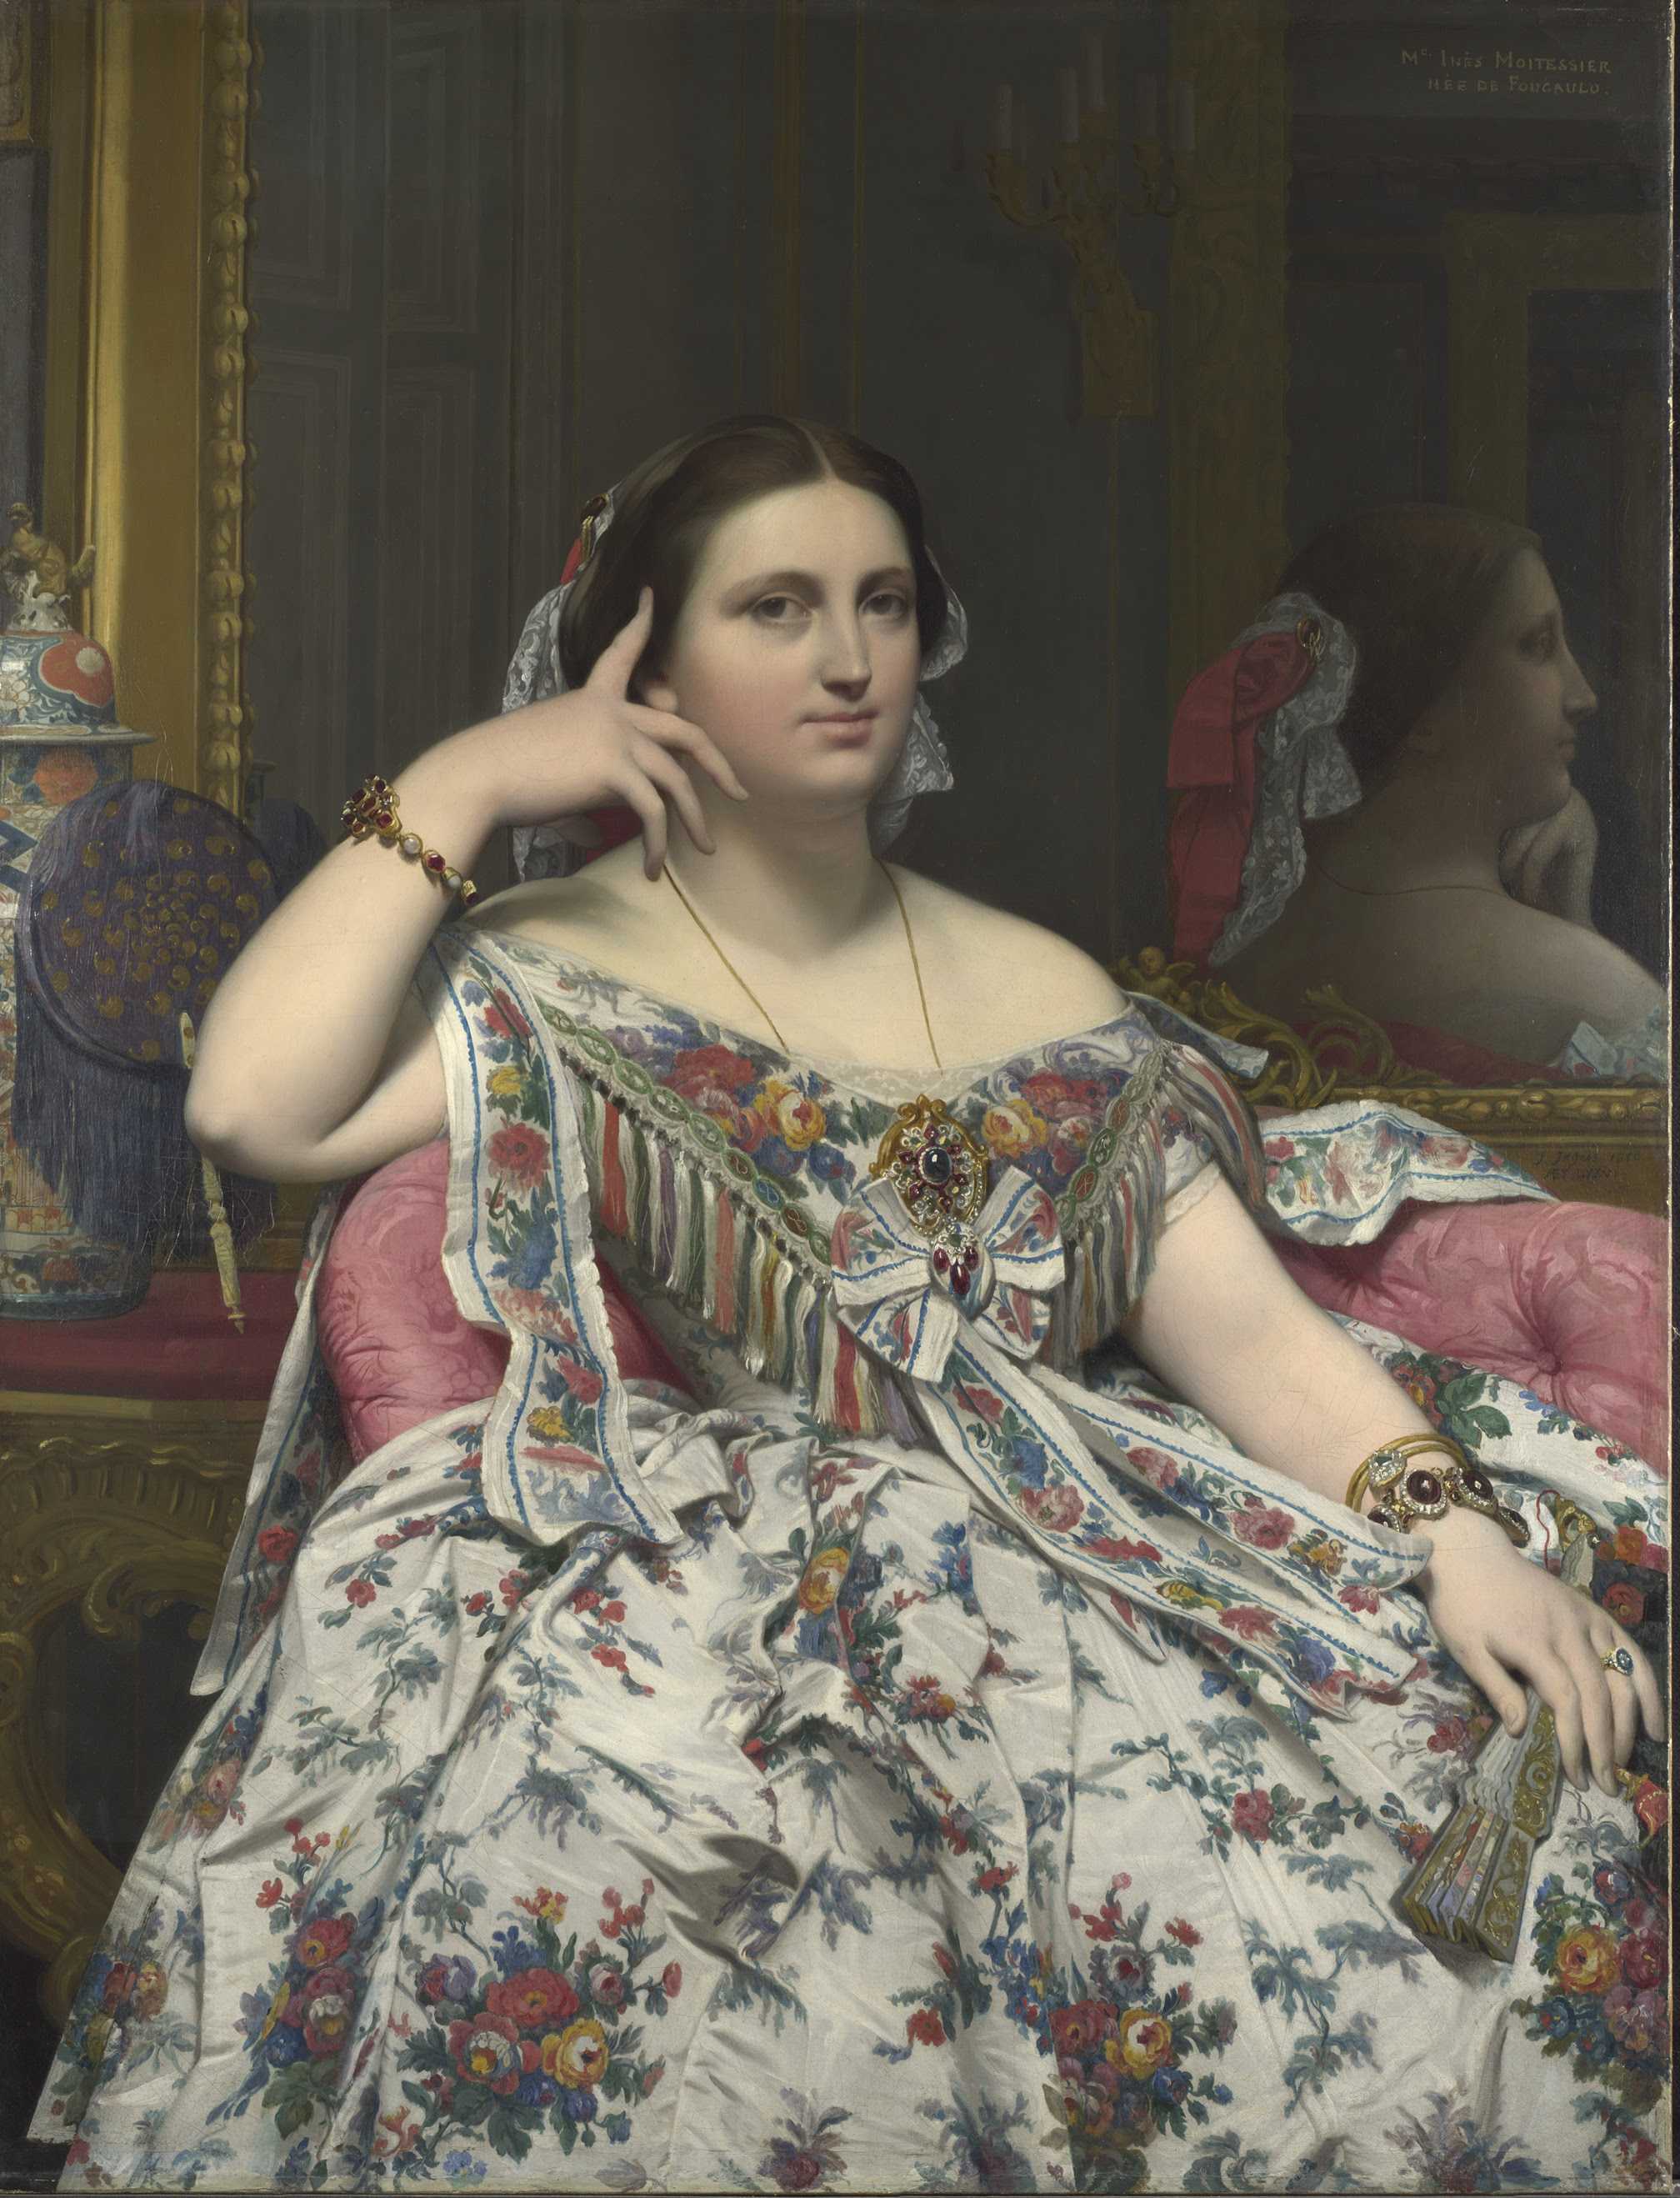 Jean-Auguste-Dominique Ingres, Madame Moitessier, 1856 Oil on canvas, 120 x 92.1 cm © The National Gallery, London